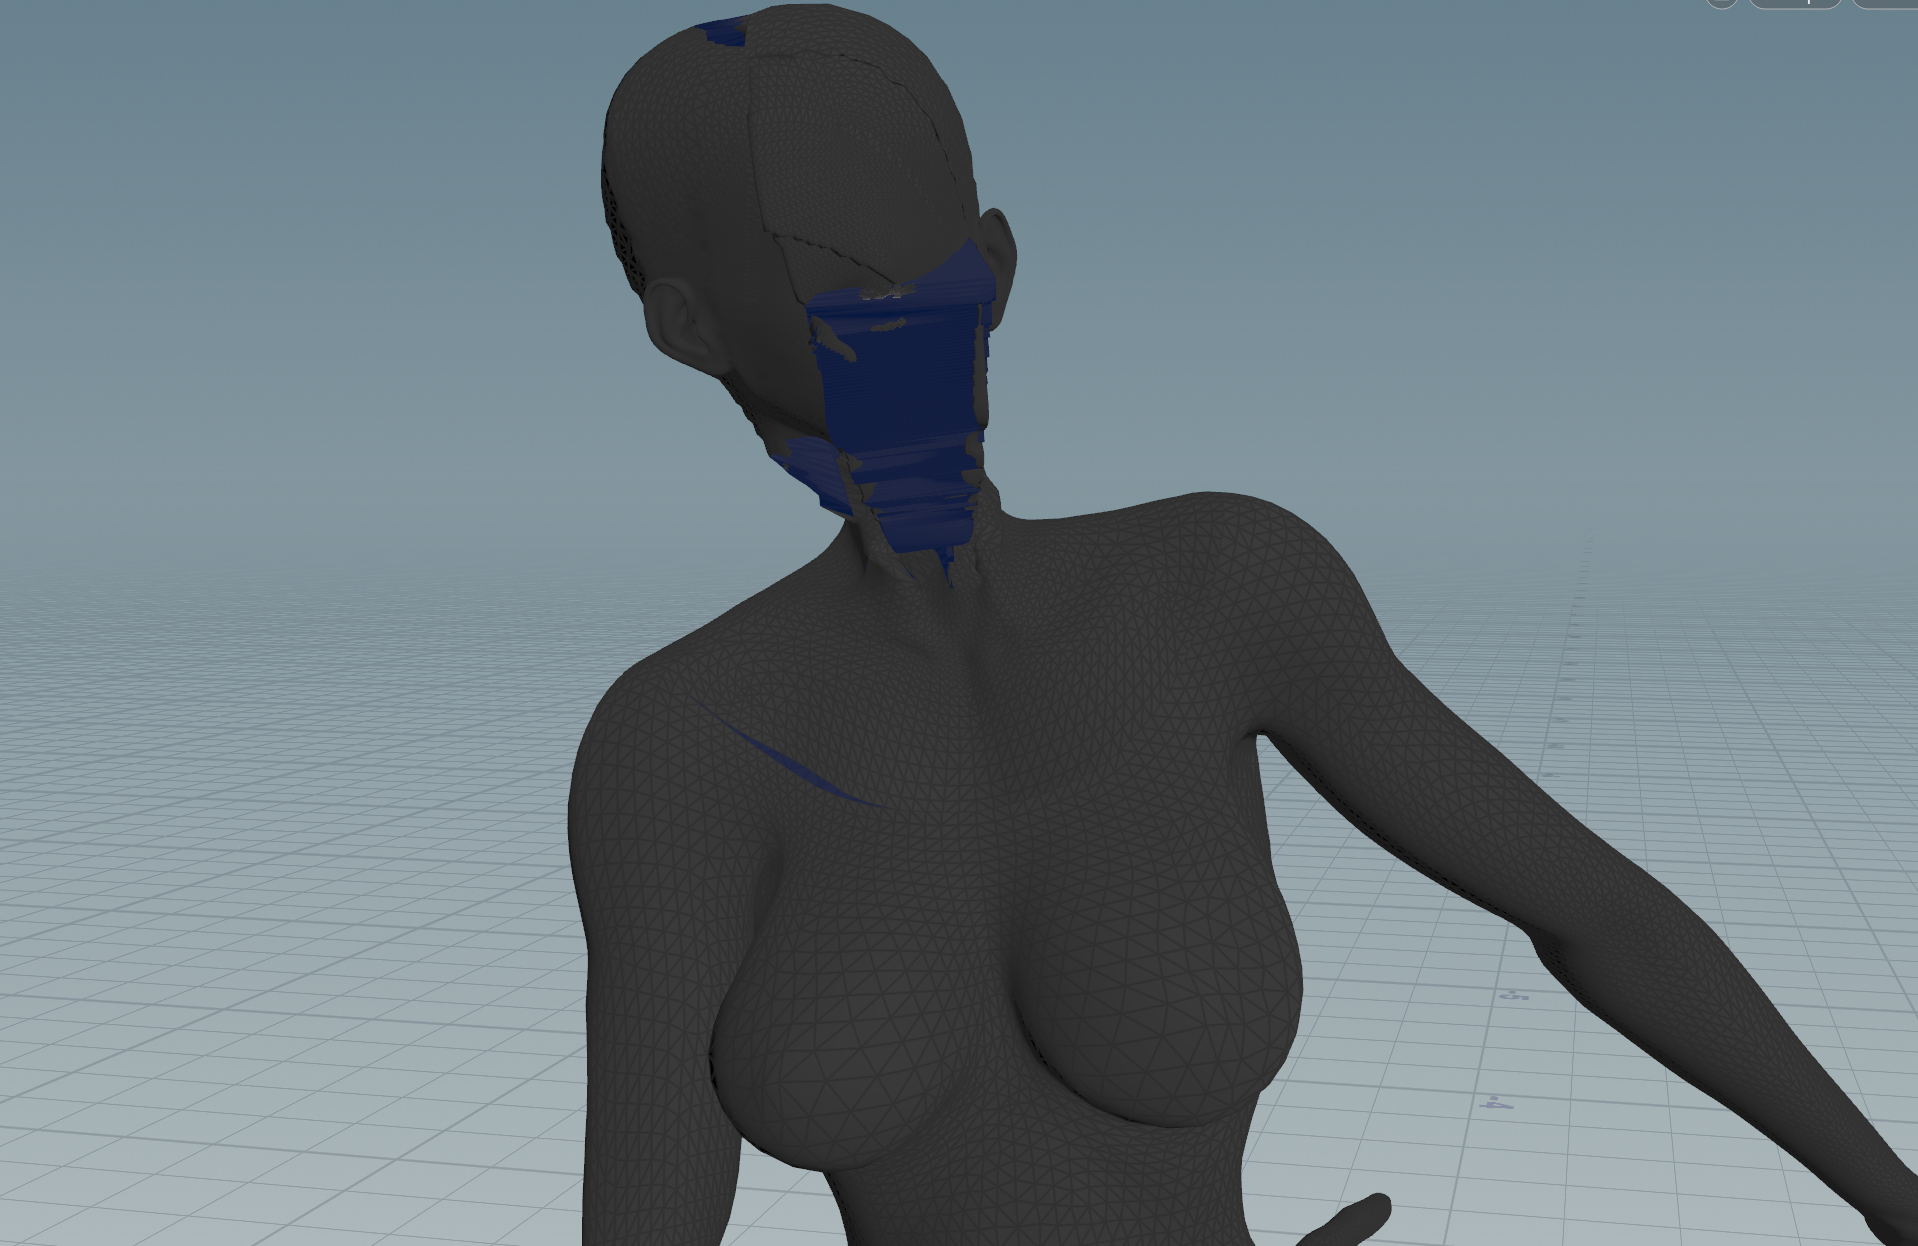 Using PointDeform to match the border of the face mesh with the body.